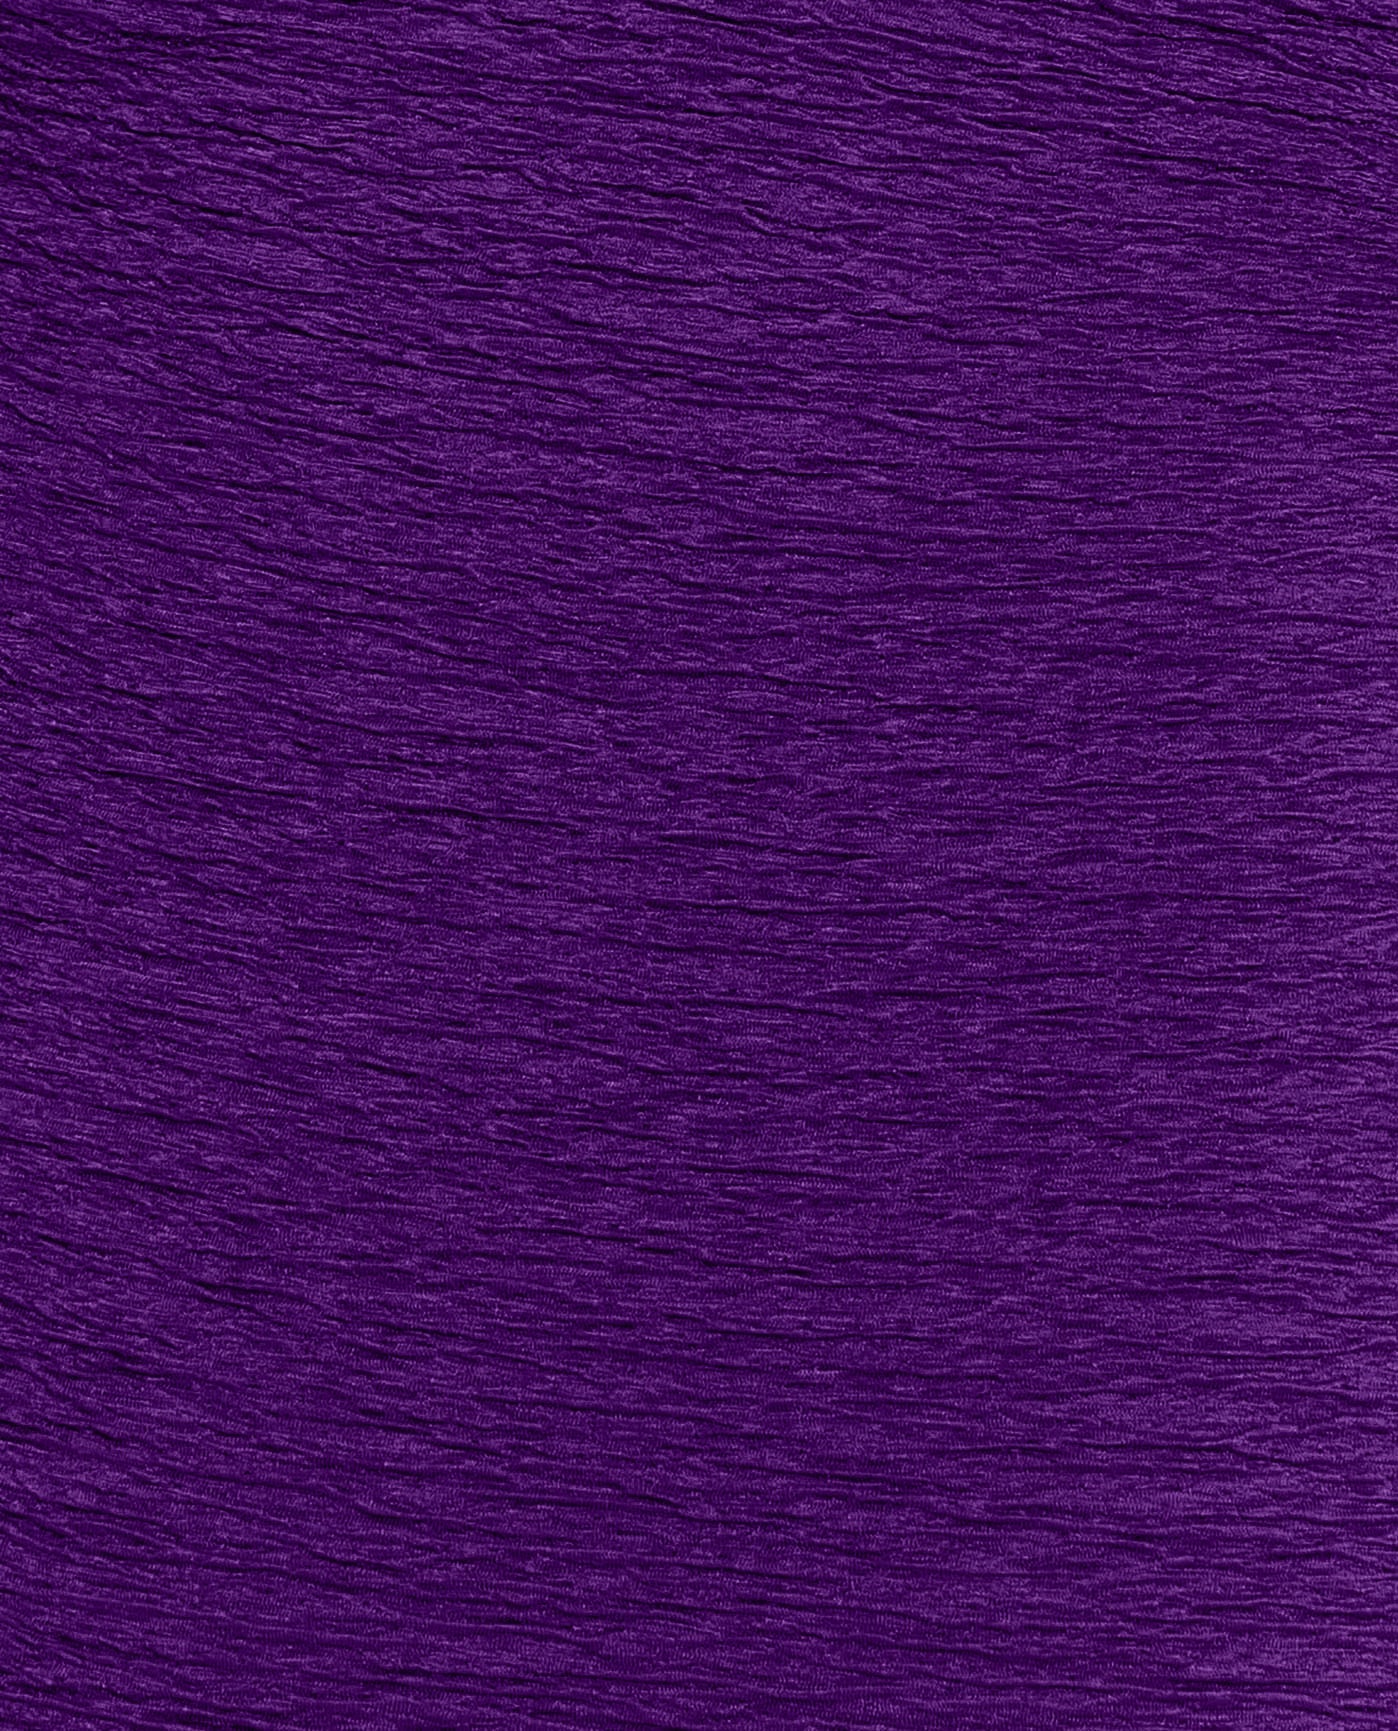 FABRIC SWATCH VIEW OF CHLORINE RESISTANT KRINKLE TEXTURED SOLID EMPIRE MIO PLUS SIZE ONE PIECE | KRINKLE ACAI PURPLE